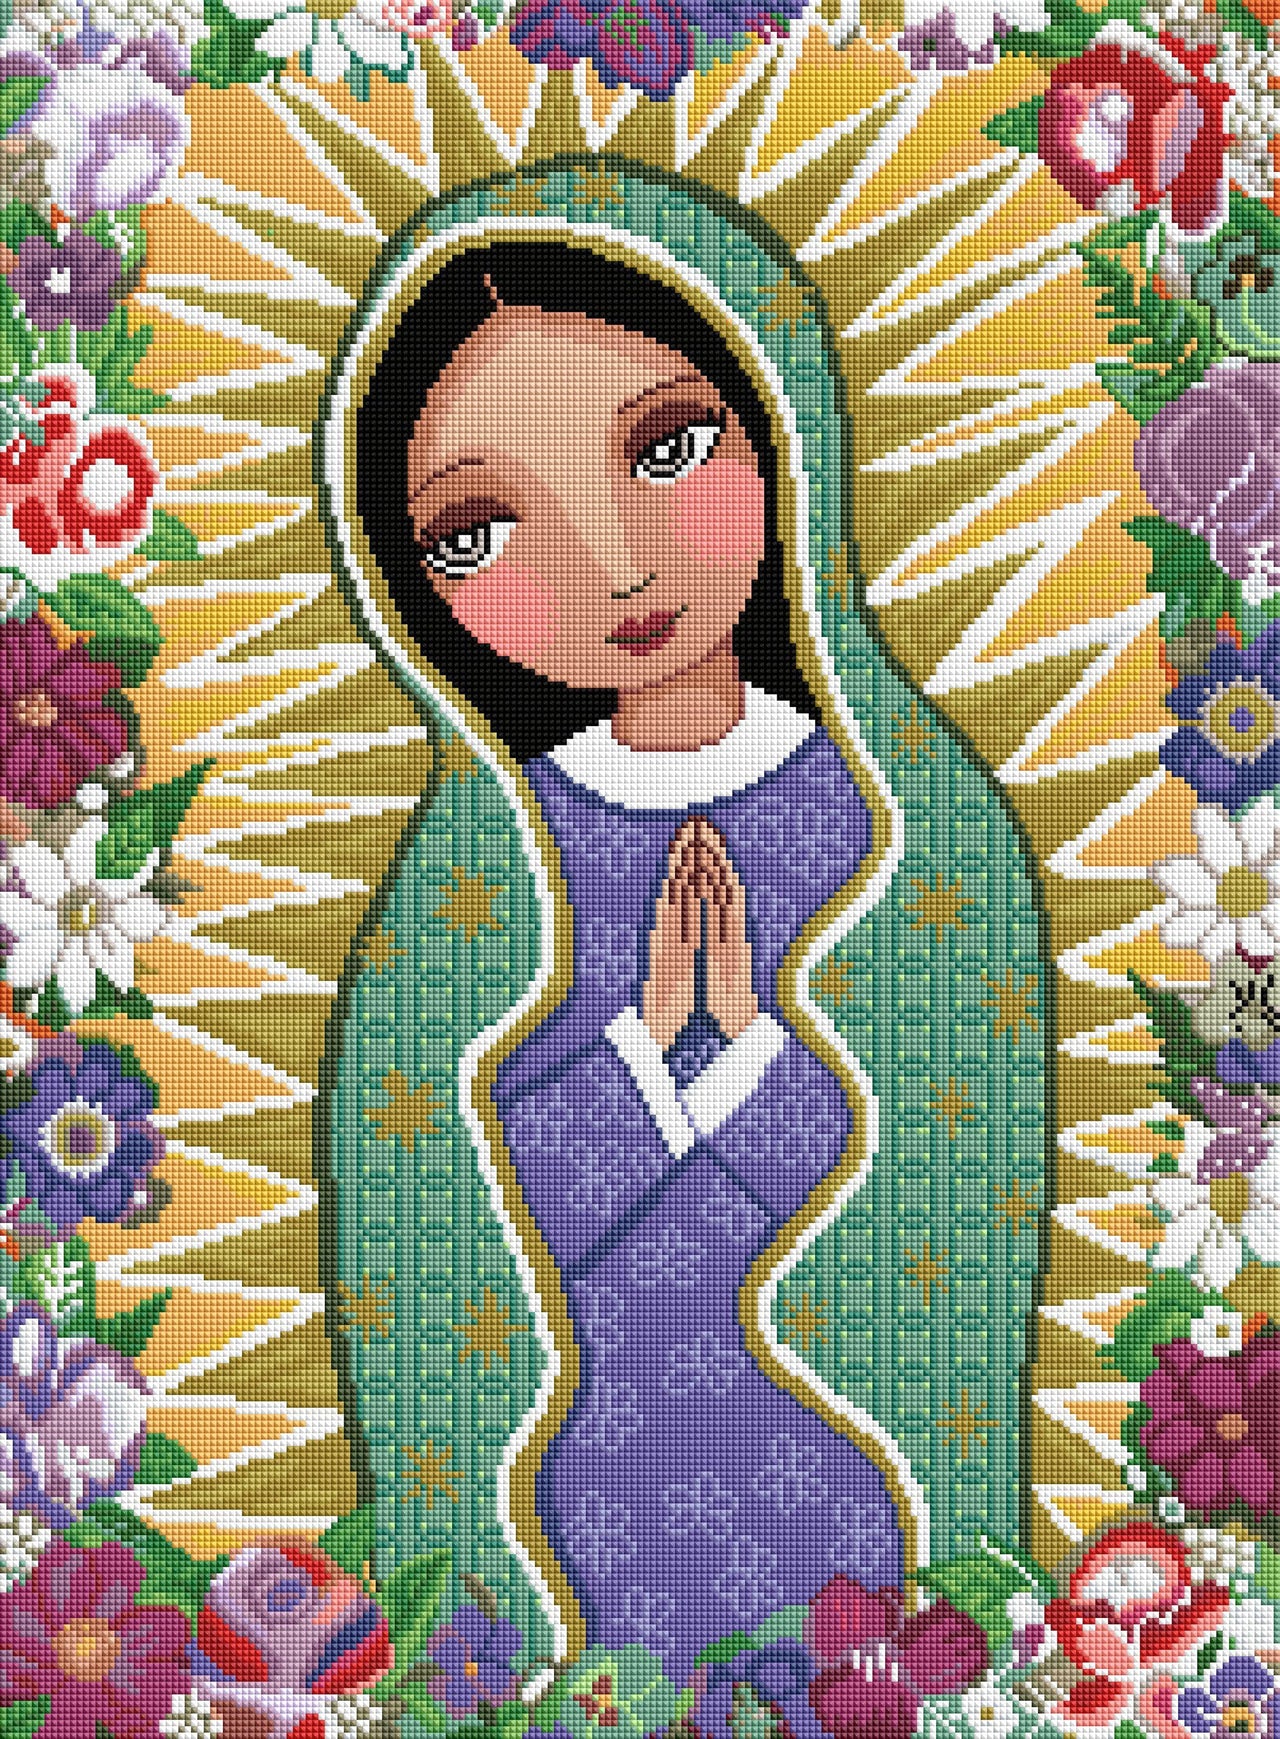 Diamond Painting Our Lady of Guadalupe 20" x 27" (51cm x 69cm) / Square with 46 Colors including 4 ABs / 54,873